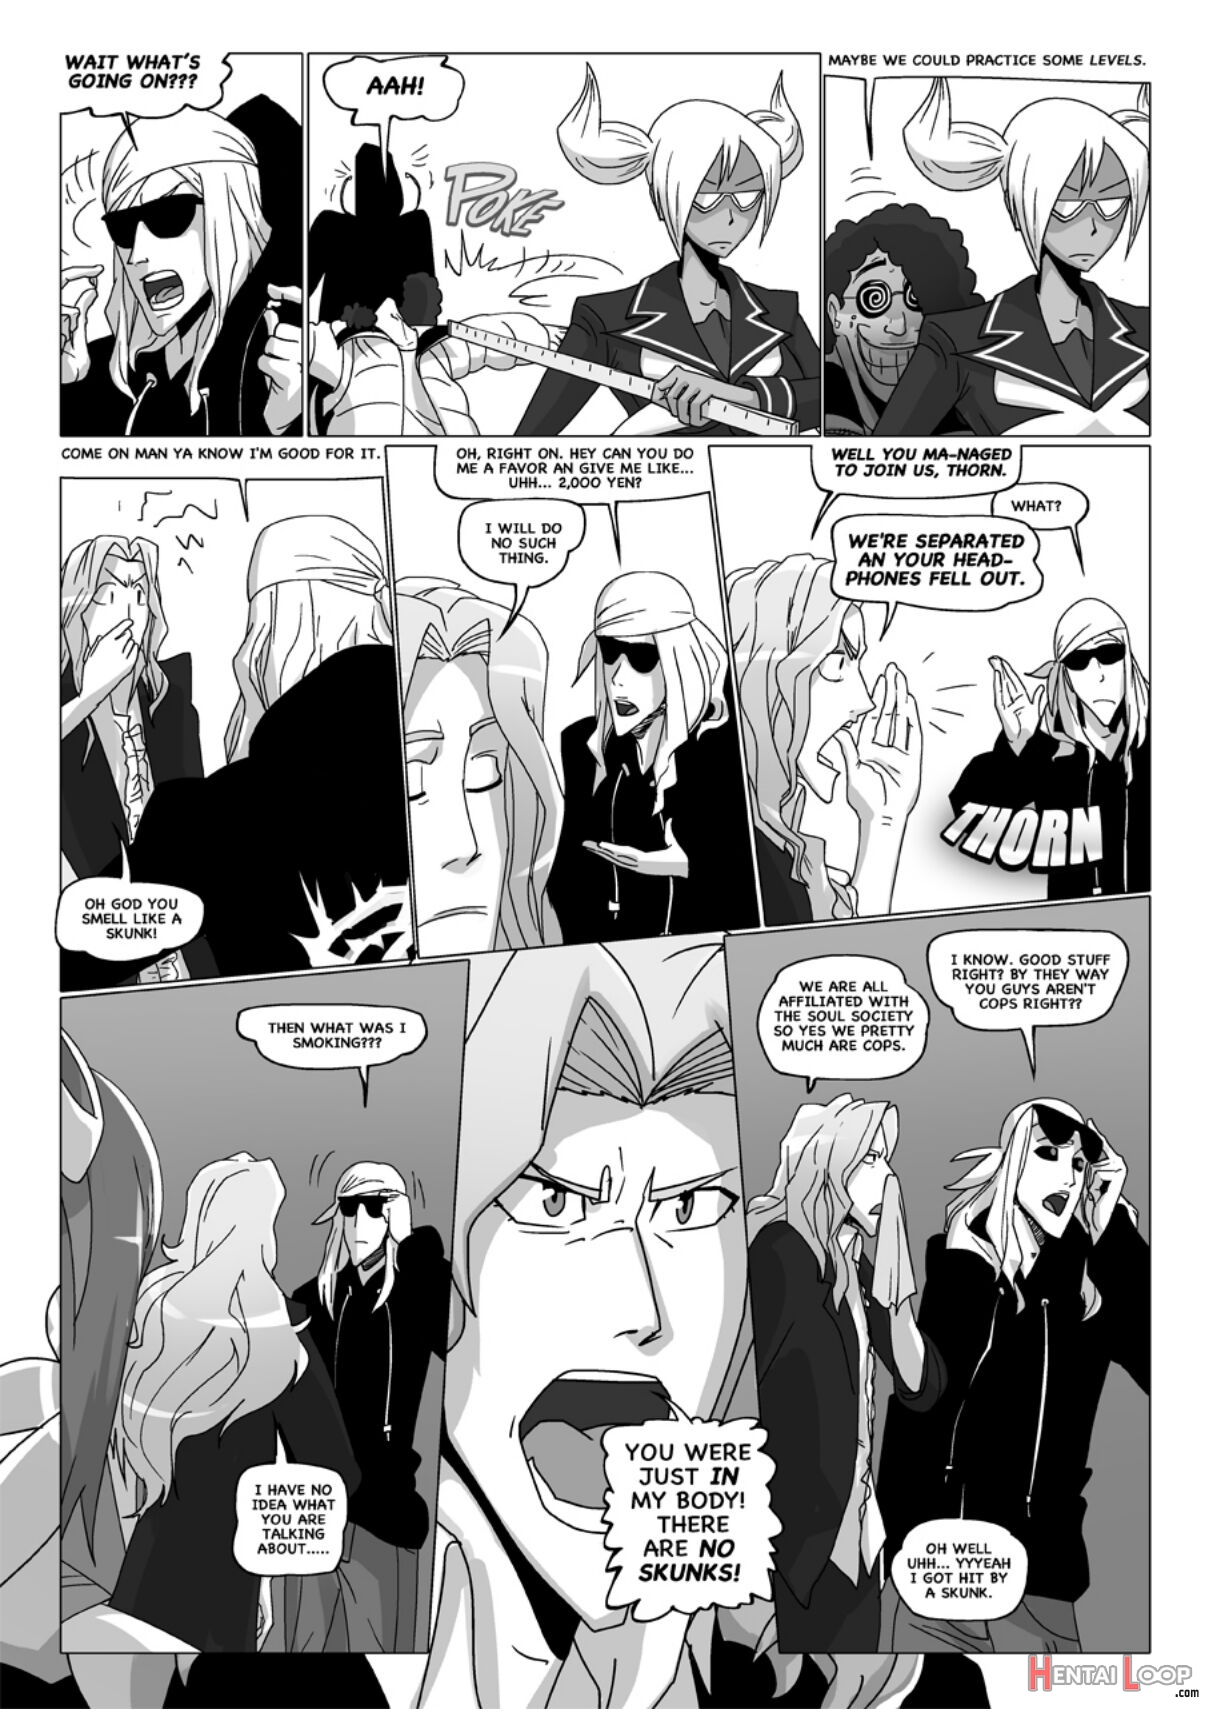 Happy To Serve You - Xxx Version page 234